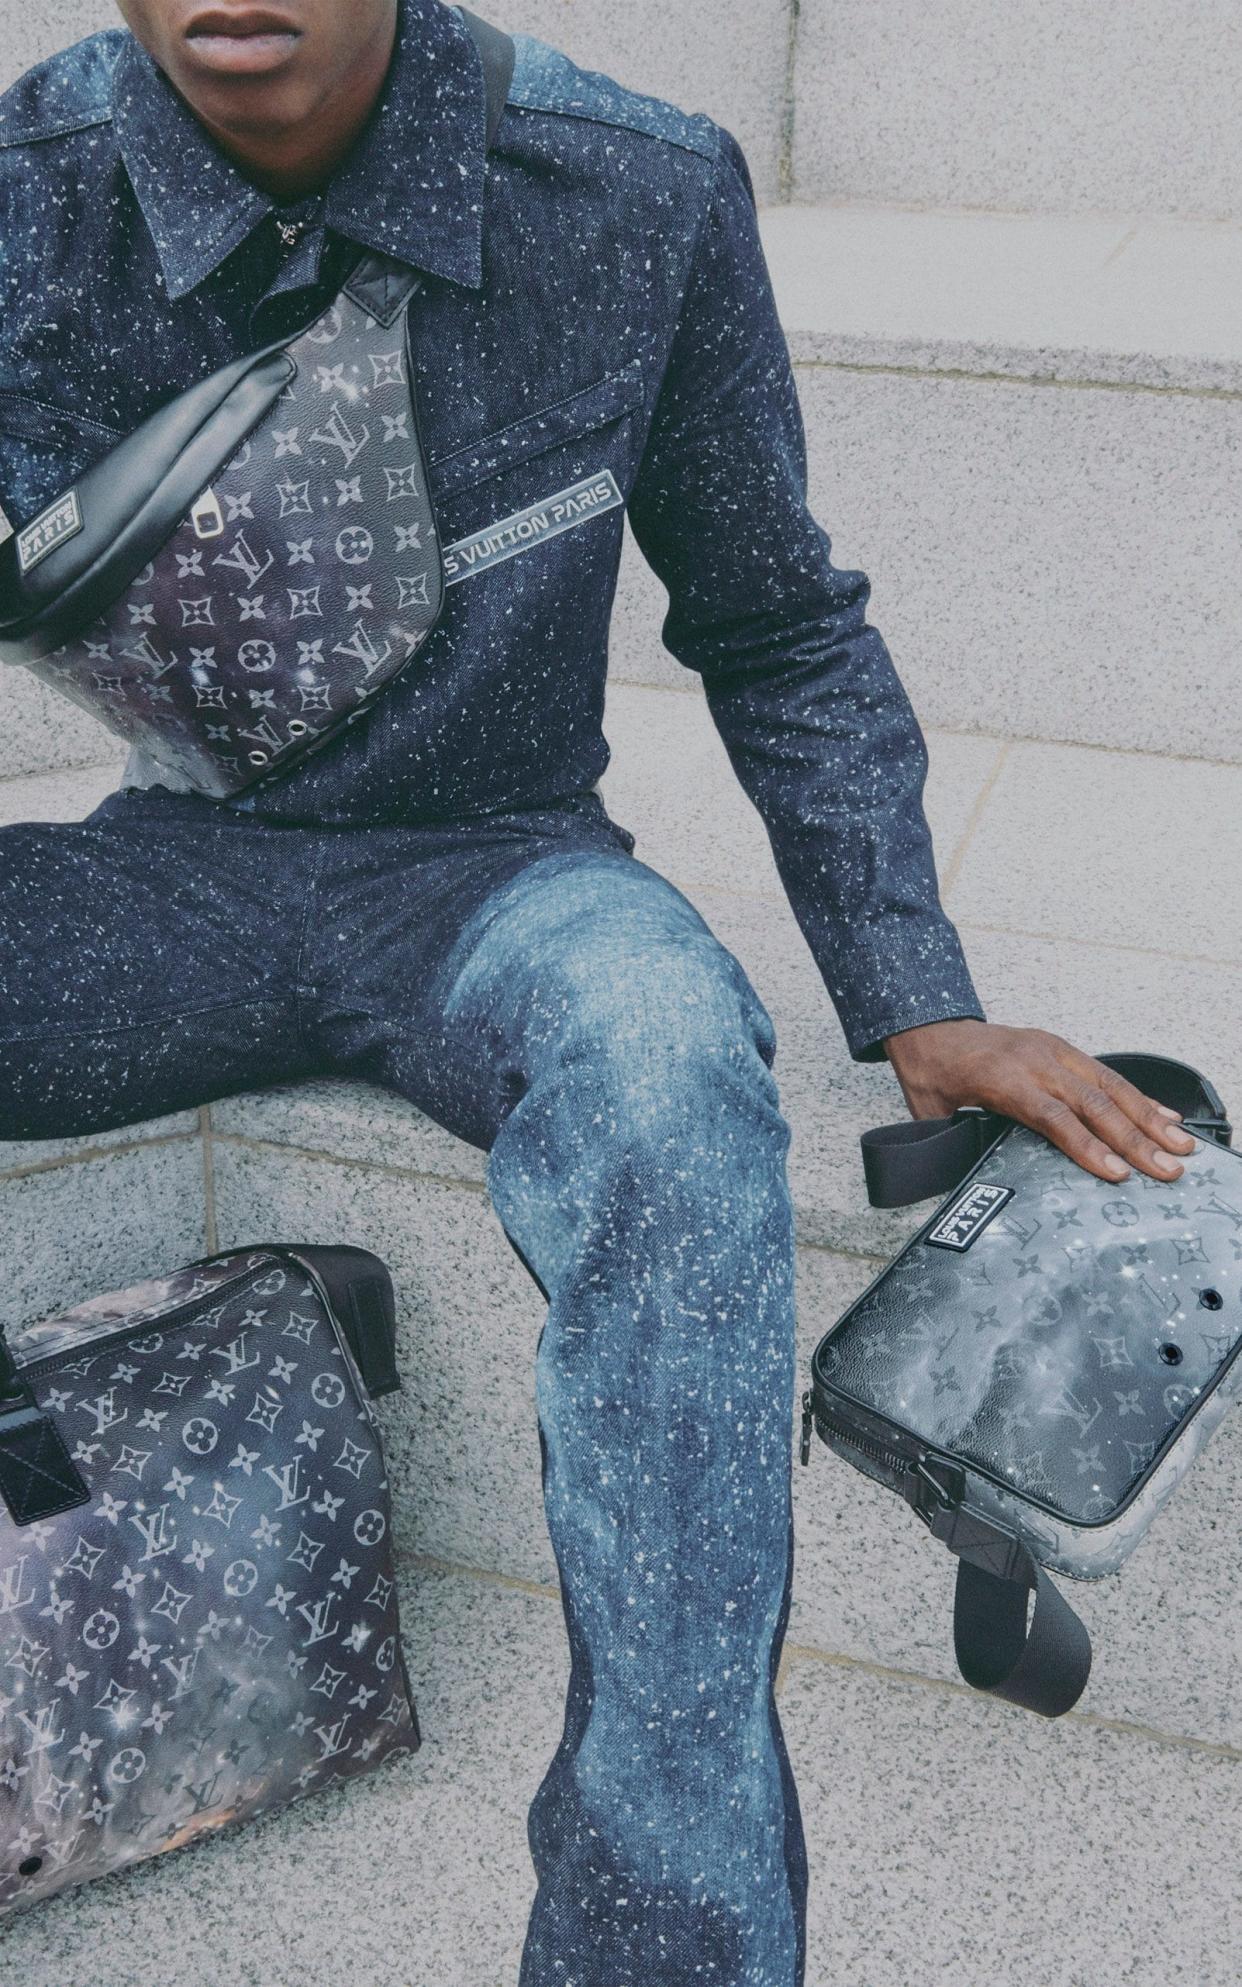 Louis Vuitton's new Galaxy collection